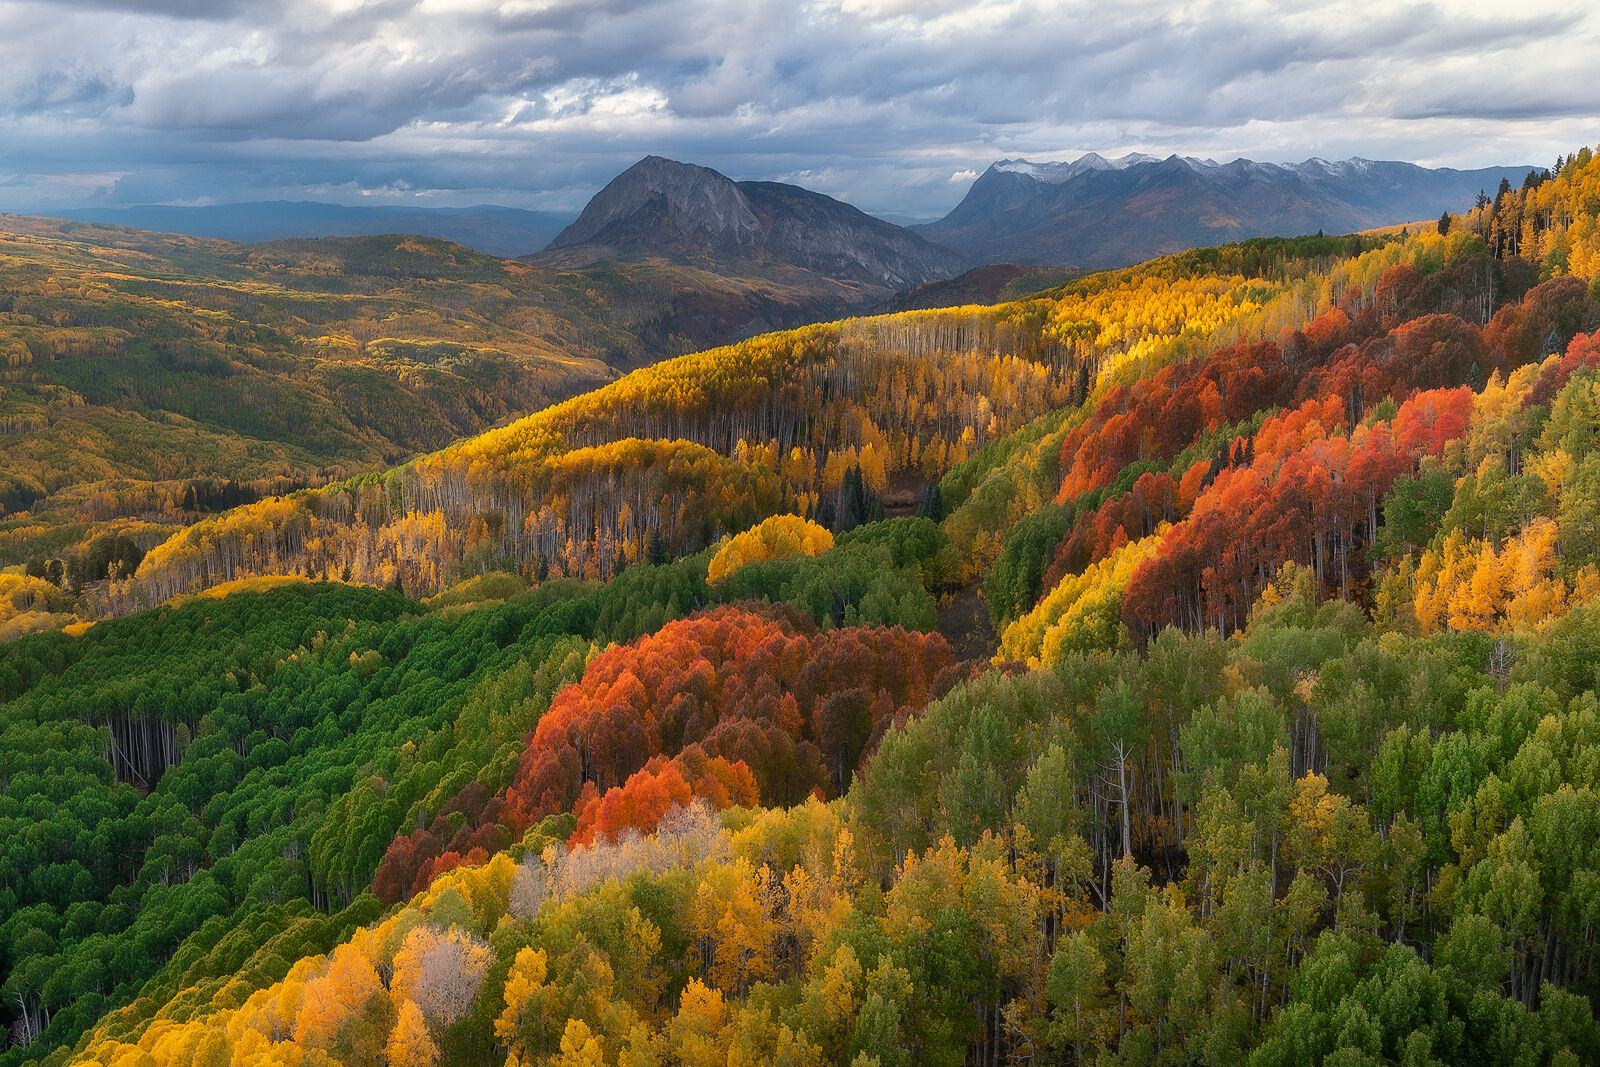 Mountains in the distance are surrounded with a valley of aspen trees in colors of red, yellow, green.